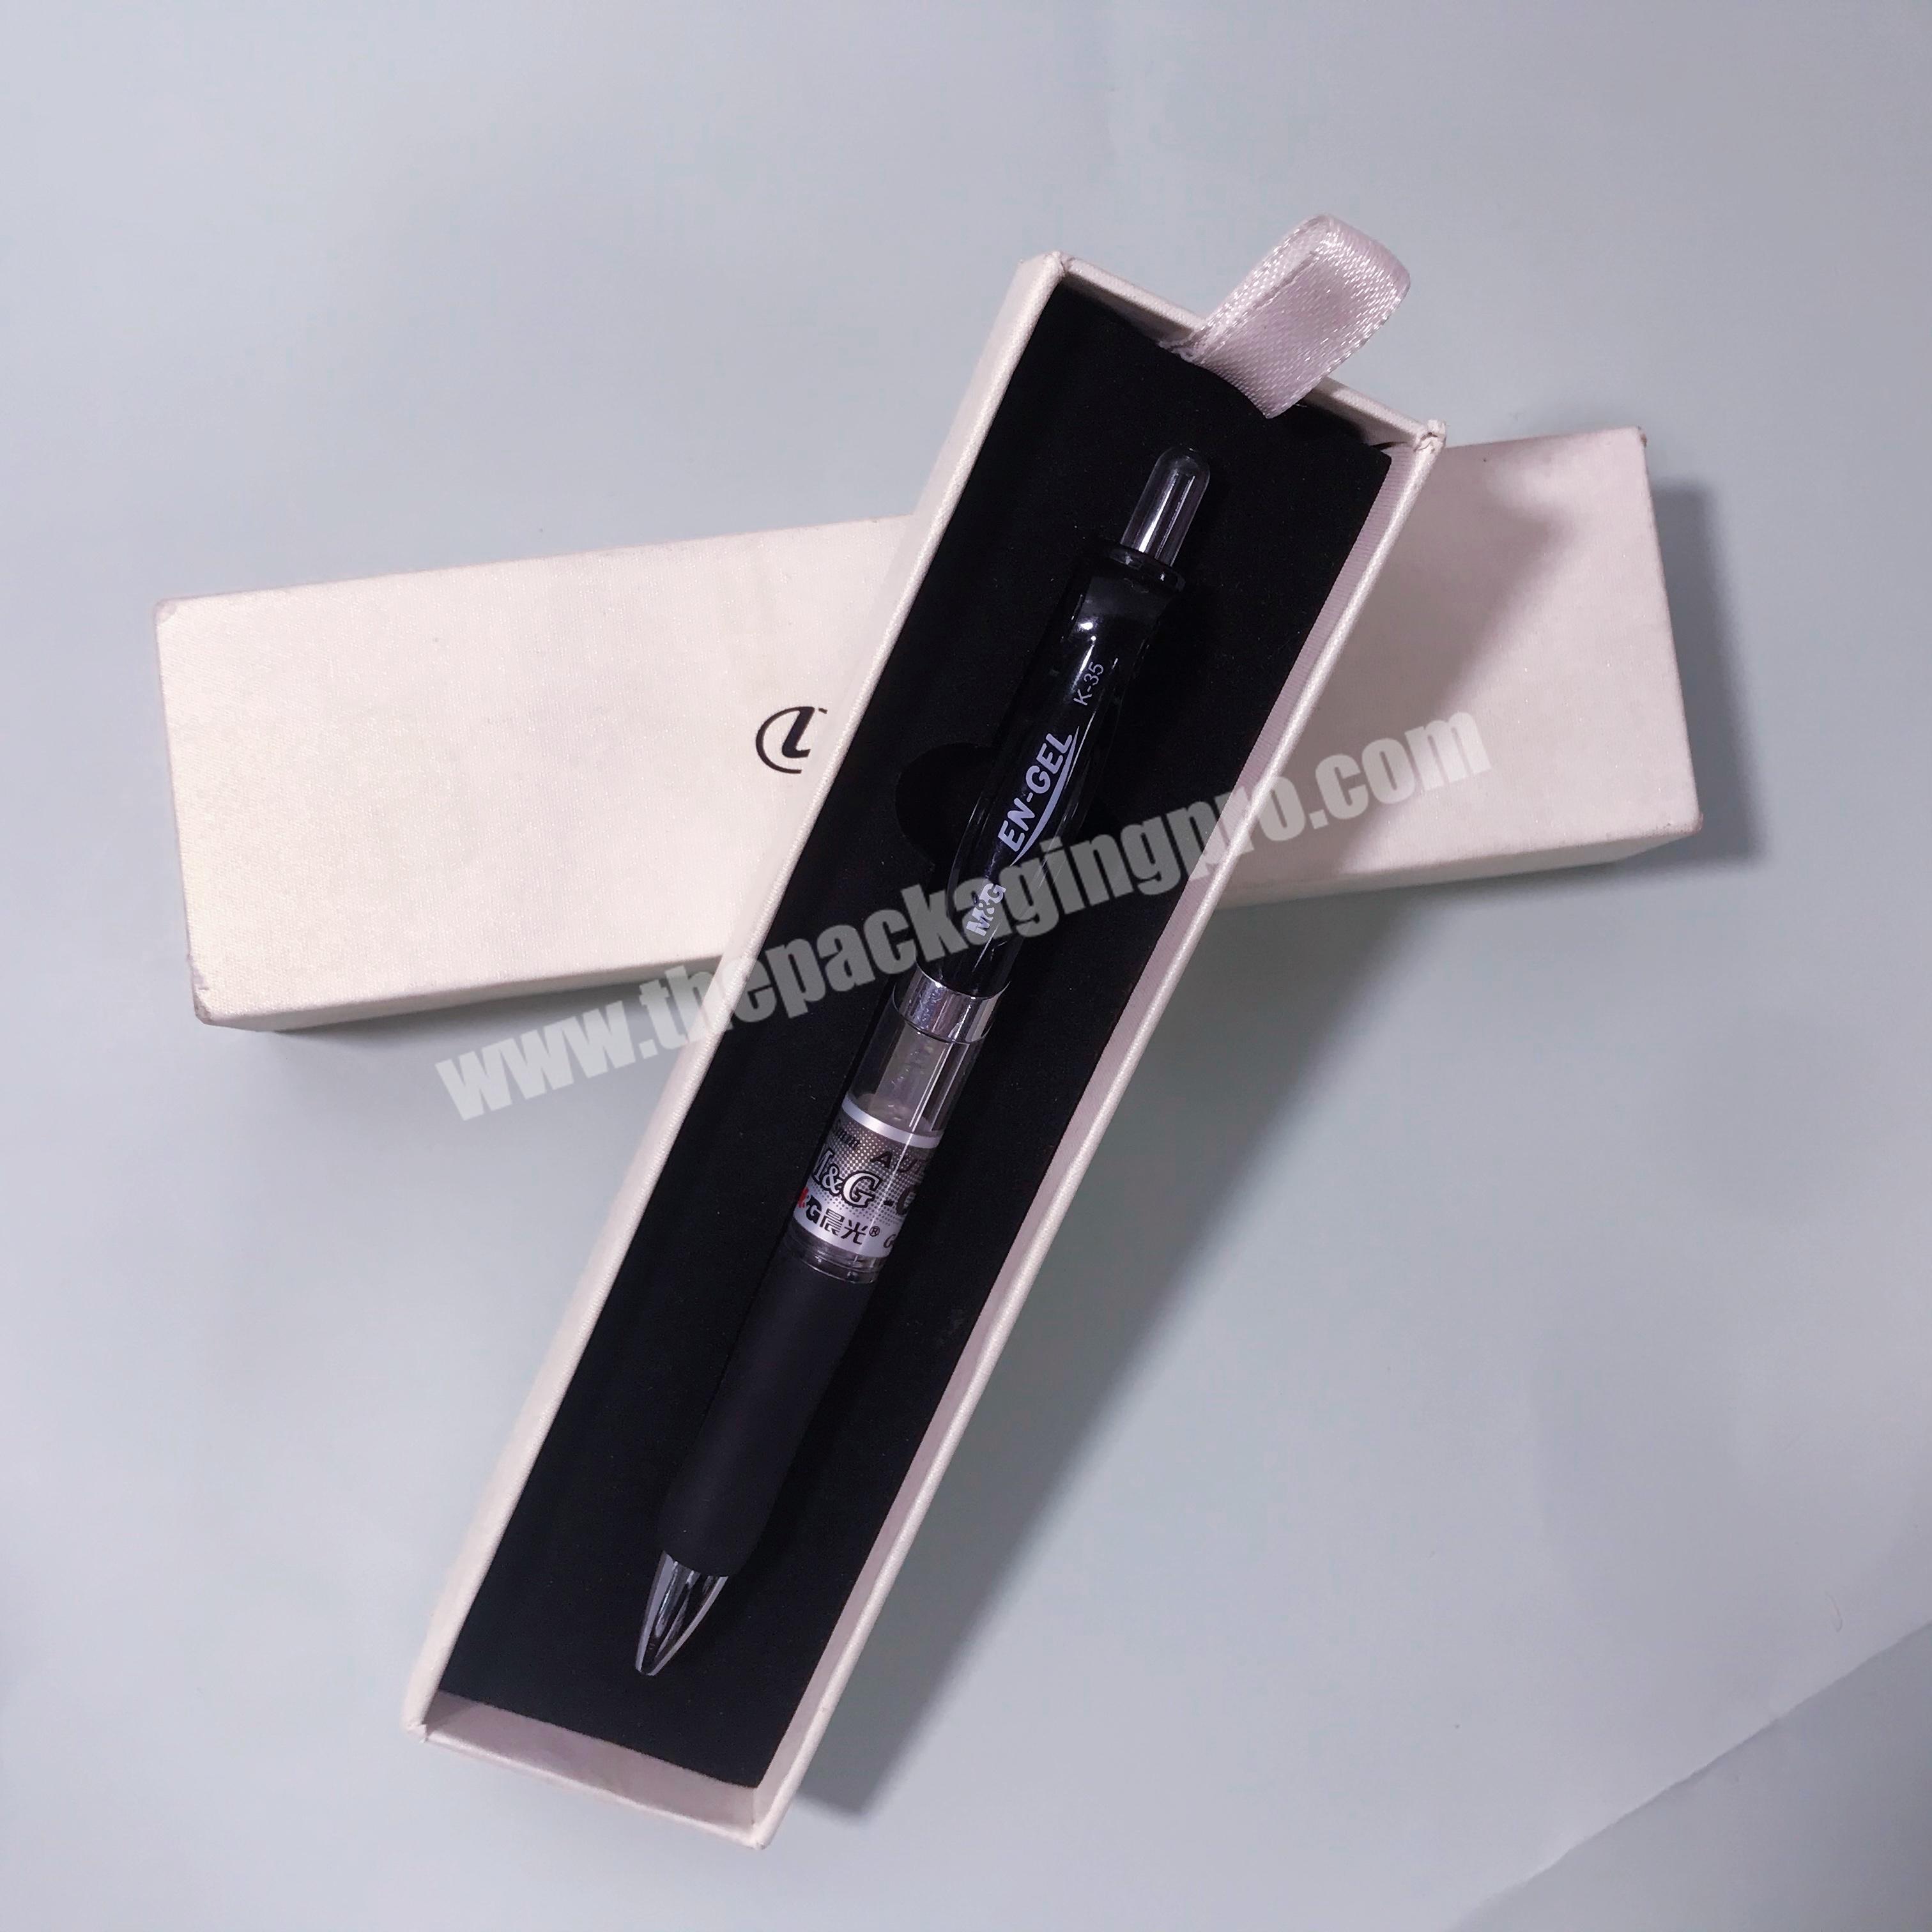 Custom Luxury pen Boxes Packaging Design logo ,White drawer tray can be customized